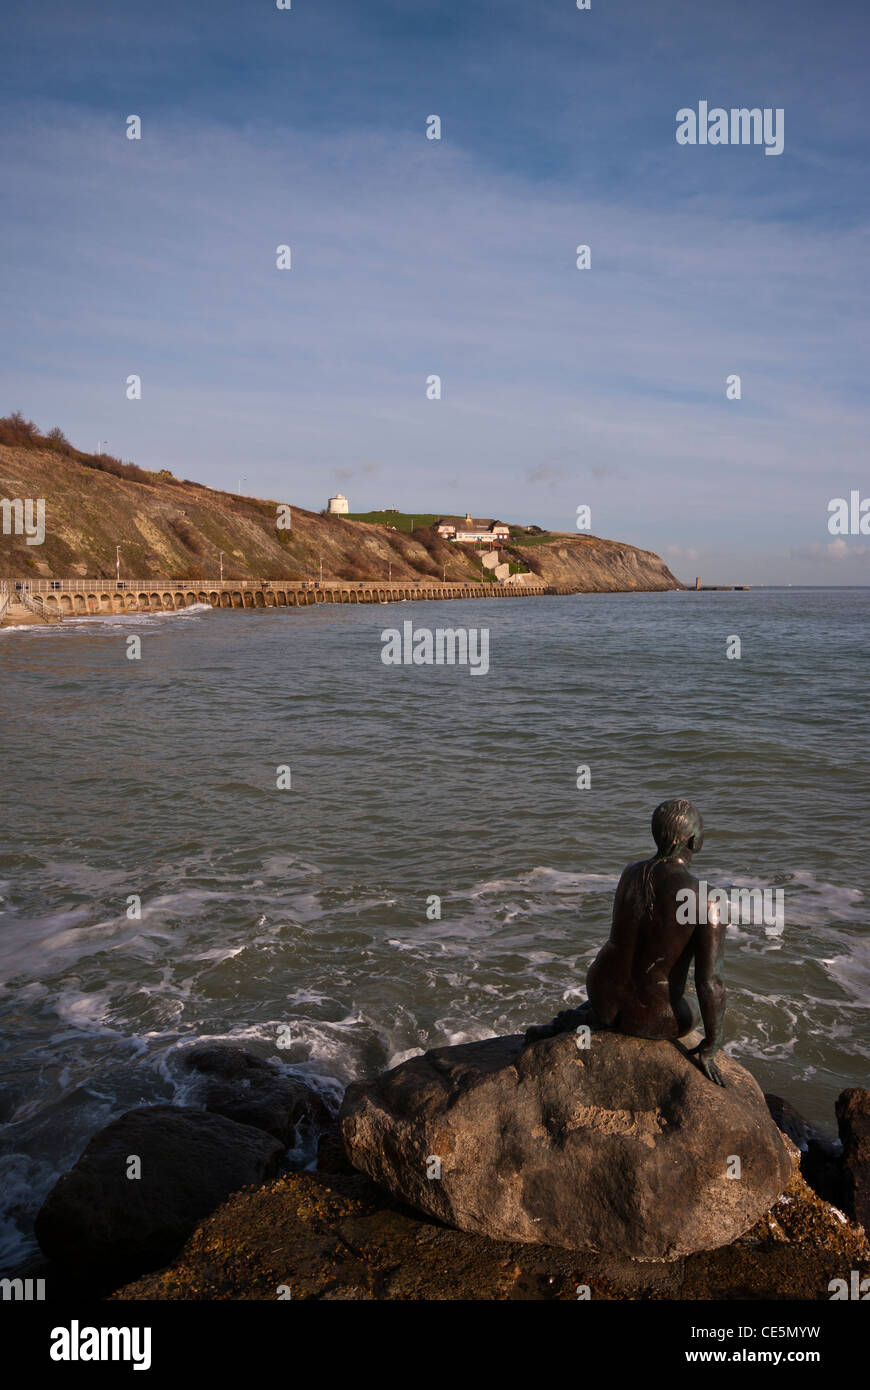 The Little Mermaid Statue On The Waterfront At Folkestone Kent UK Looking towards the sea and the cliffs Stock Photo